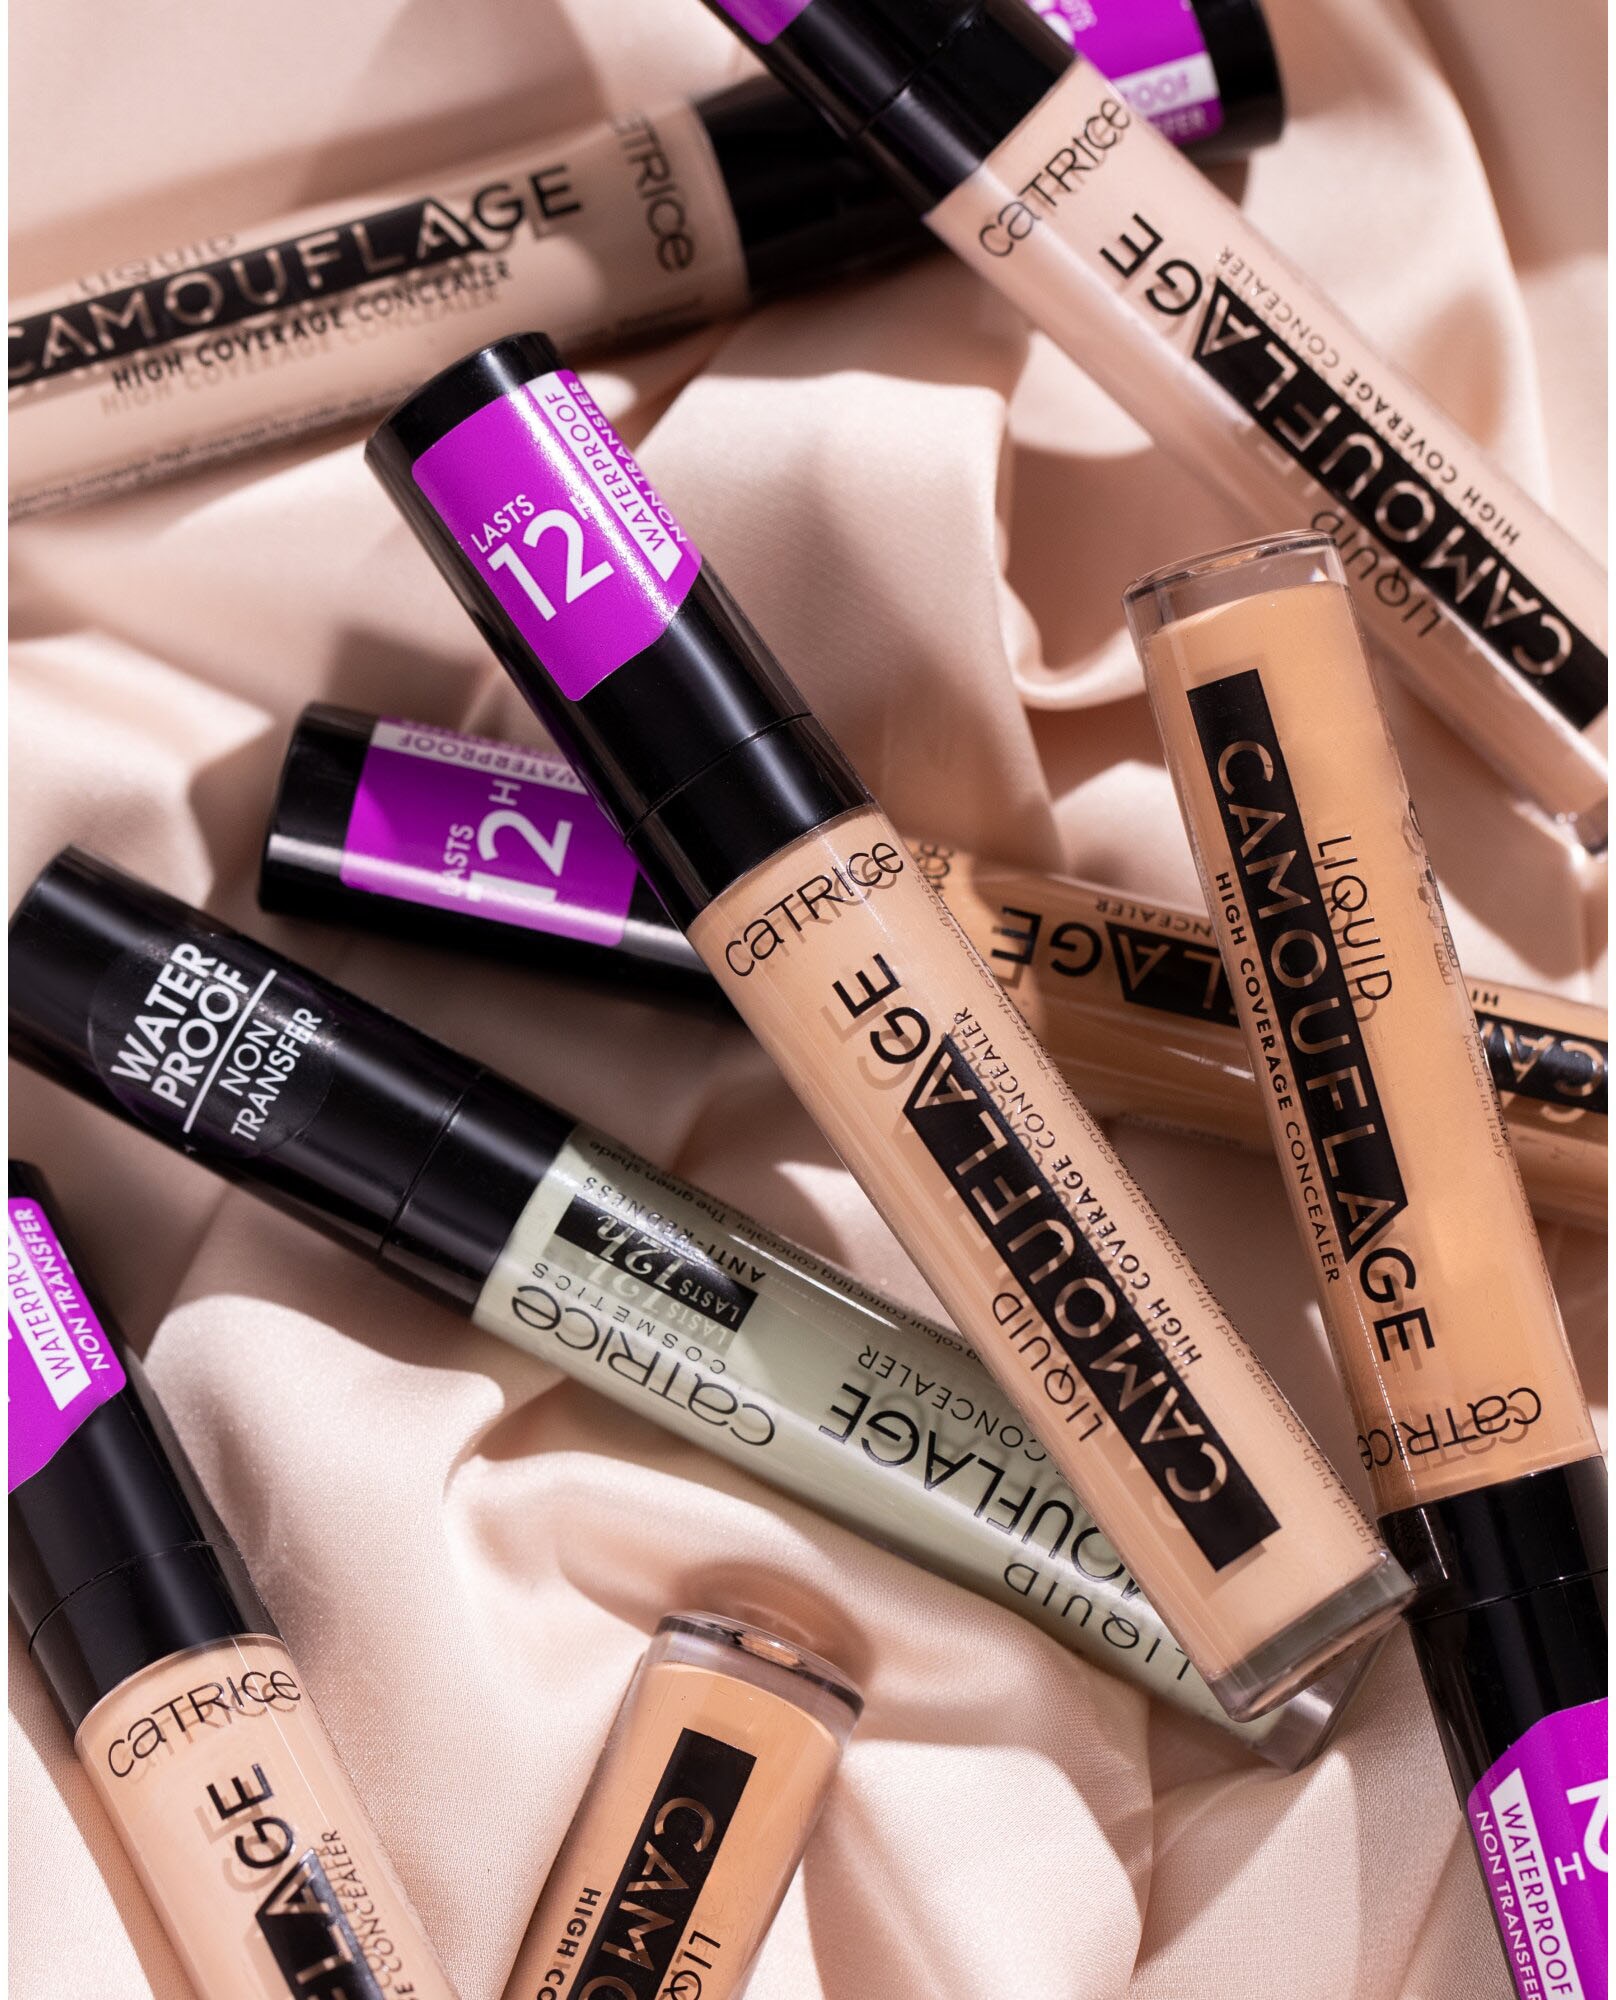 Catrice Concealer »Liquid Camouflage High Coverage«, (3er Pack)